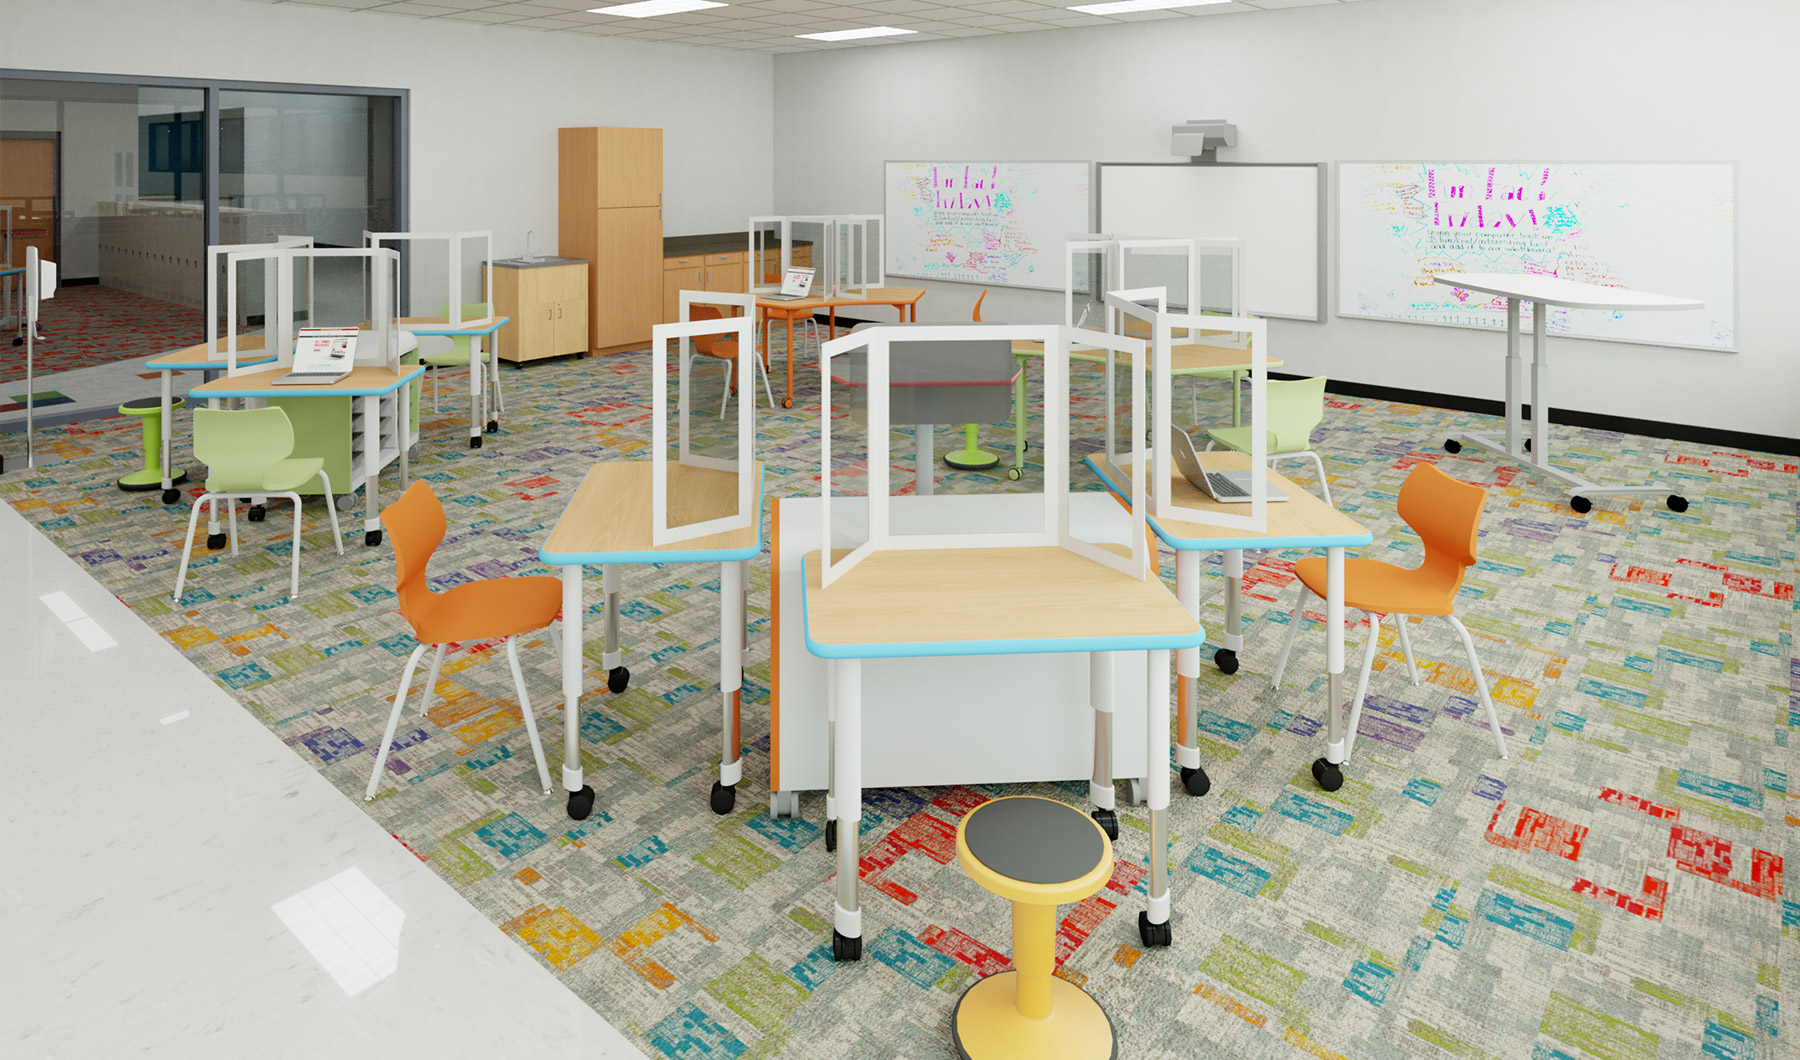 School Spaces Designed for Social Distancing - Classroom